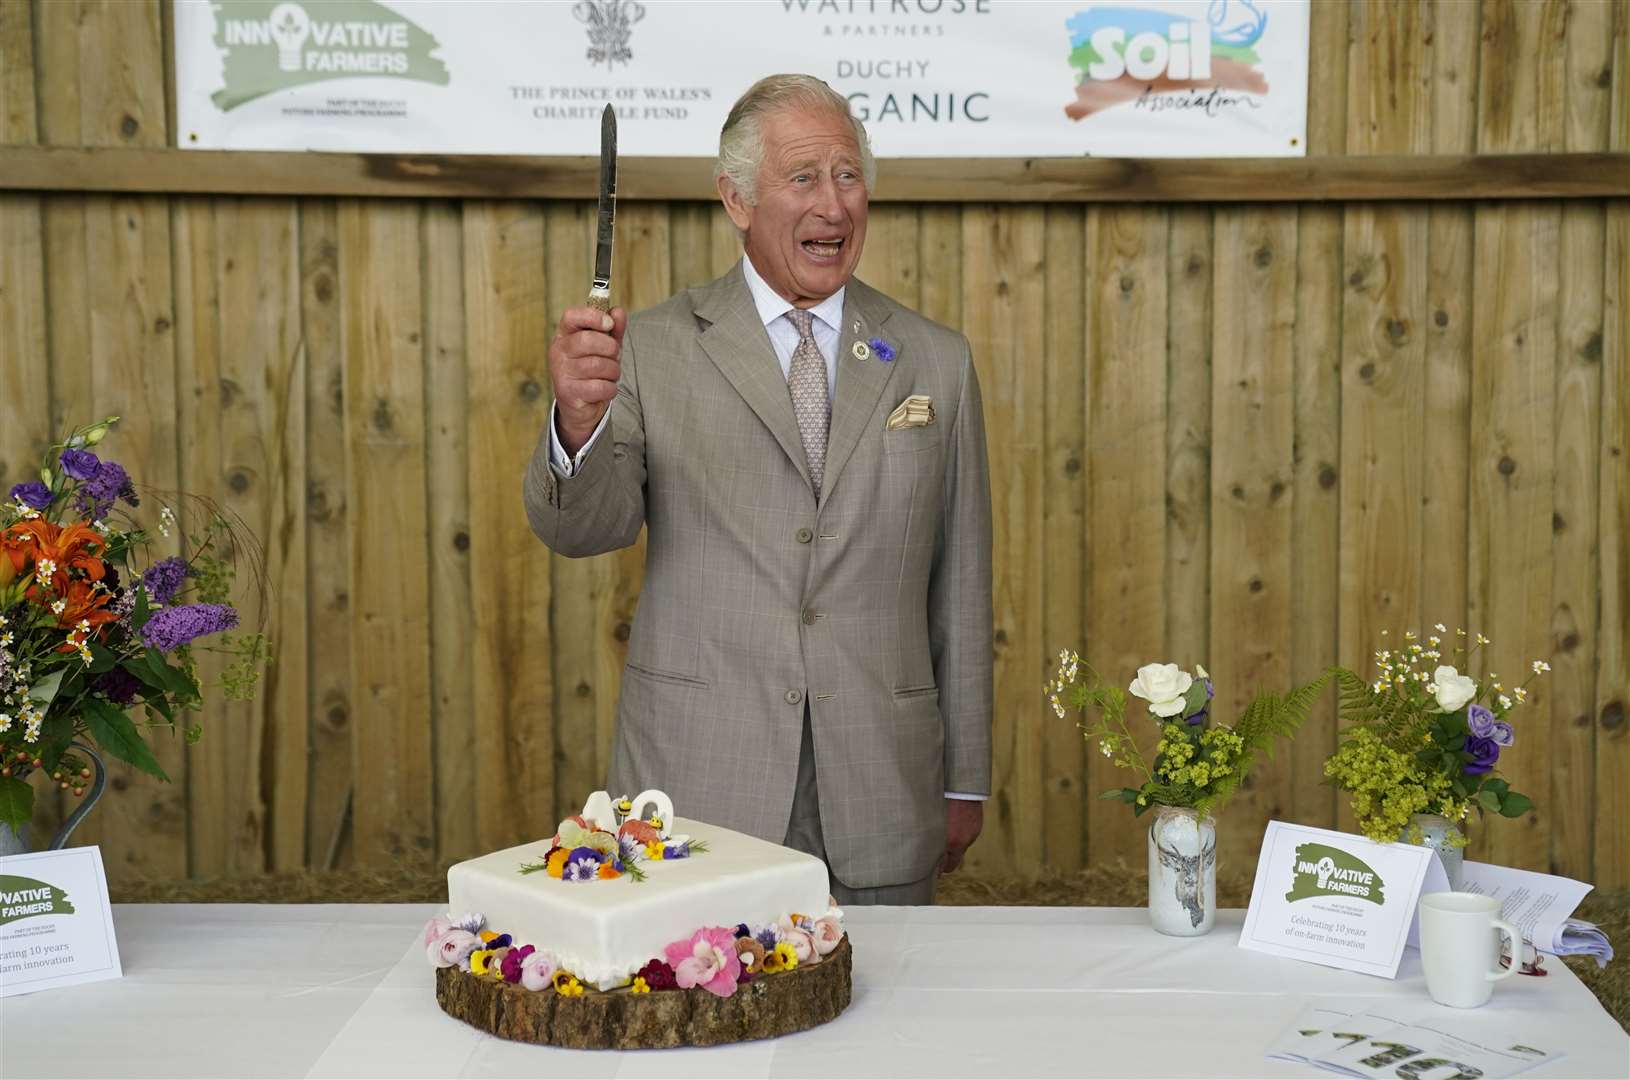 The Prince of Wales cuts a celebratory cake as he attends the Innovative Farmers 10th anniversary at Trefranck Farm, near Launceston (Andrew Matthews/PA)